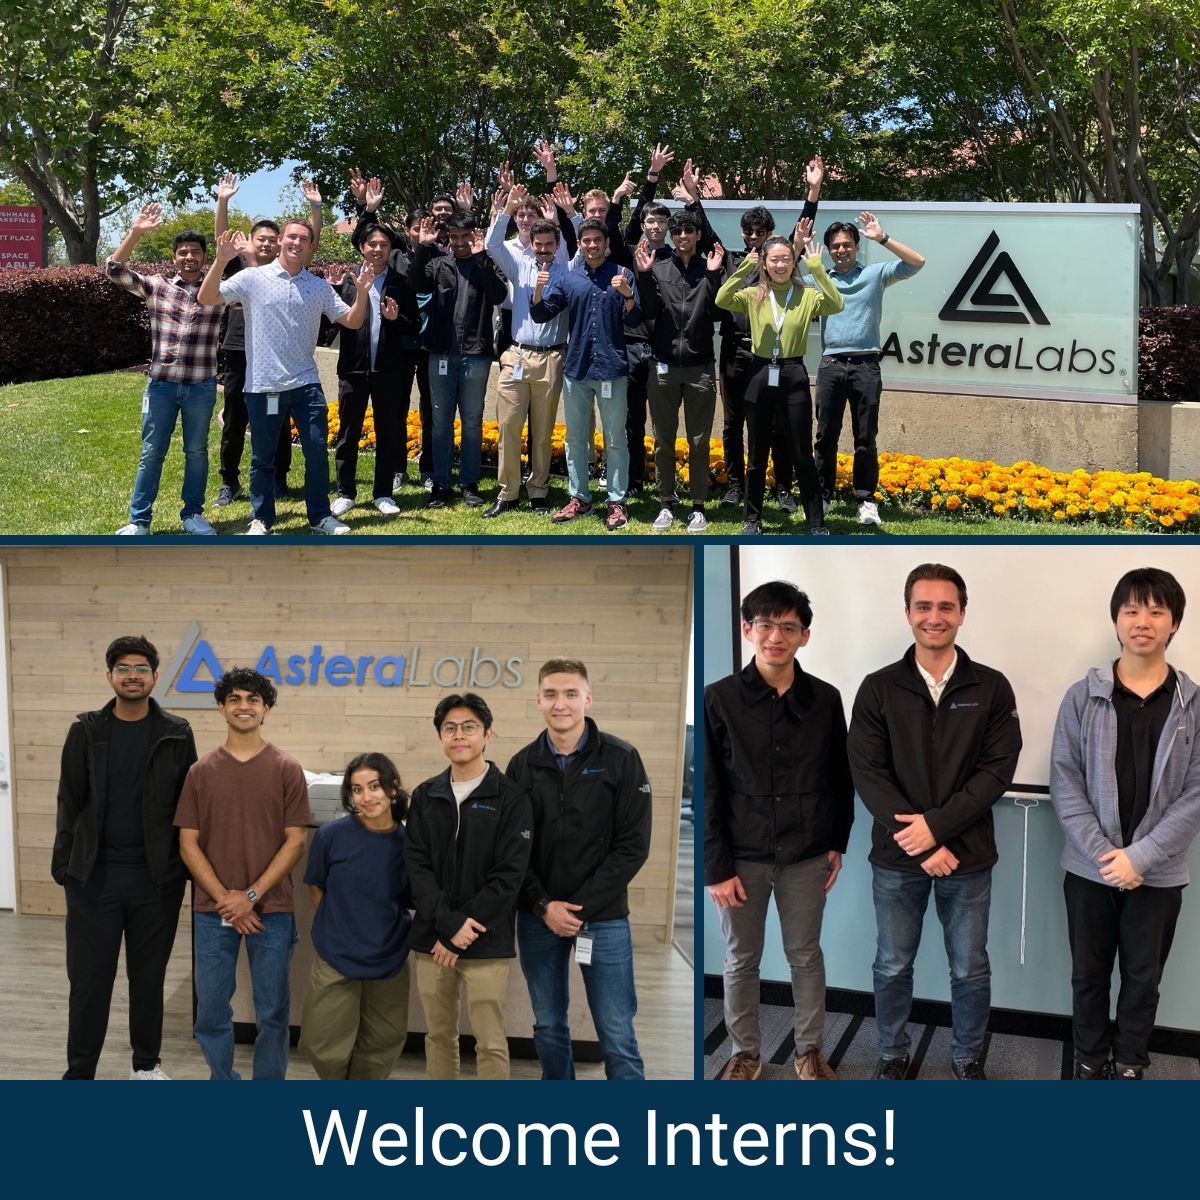 #Futureleaders have entered the building, and we are thrilled to welcome them! 🚀 We will have more than 50 interns joining this summer’s program, bringing fresh perspectives and boundless energy. Welcome to #TeamAstera.

#internship #summerintern #mentorship